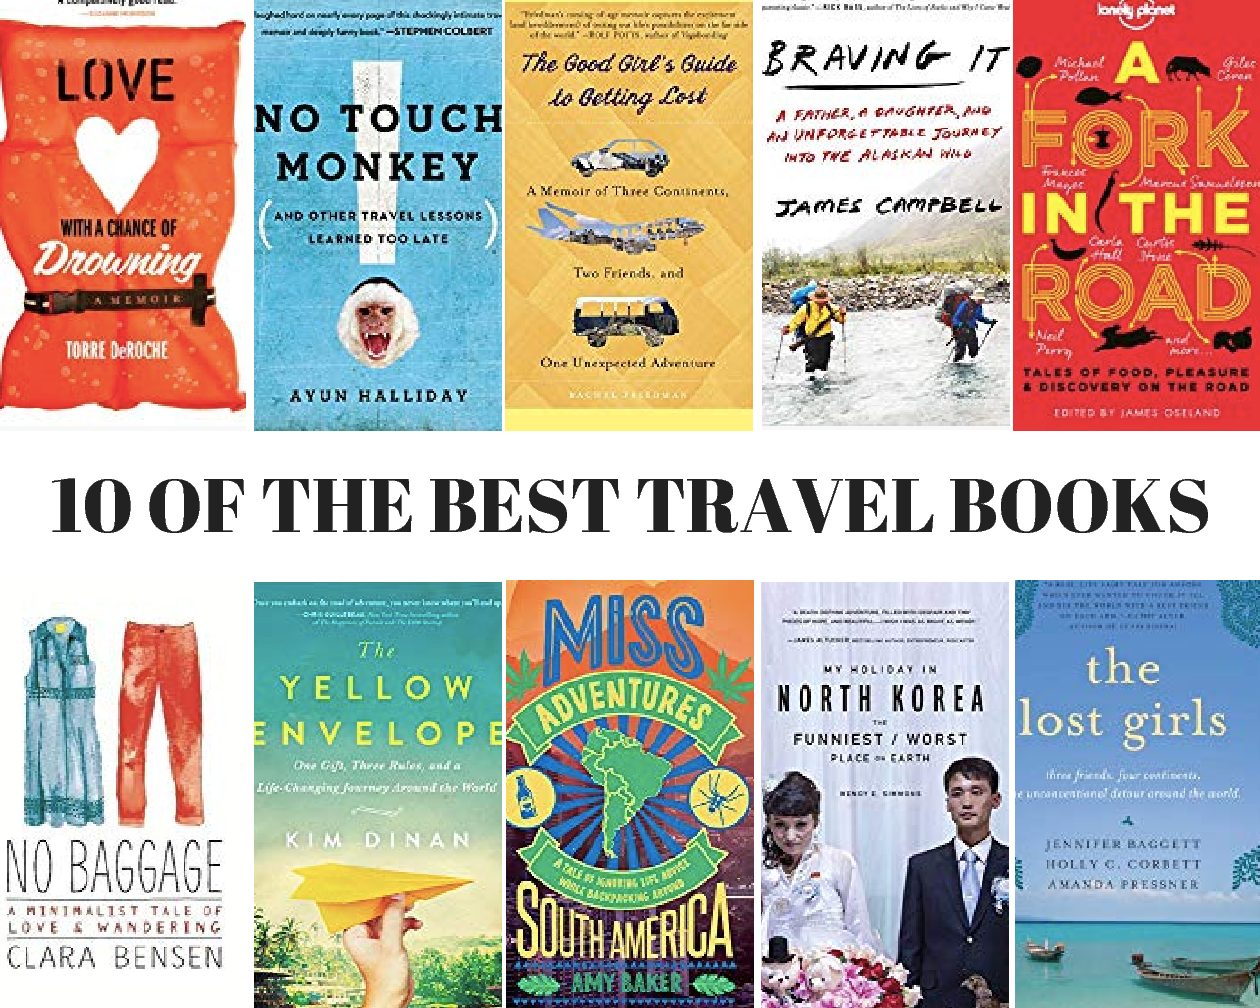 The Best Travel Books – Discoveries Of.